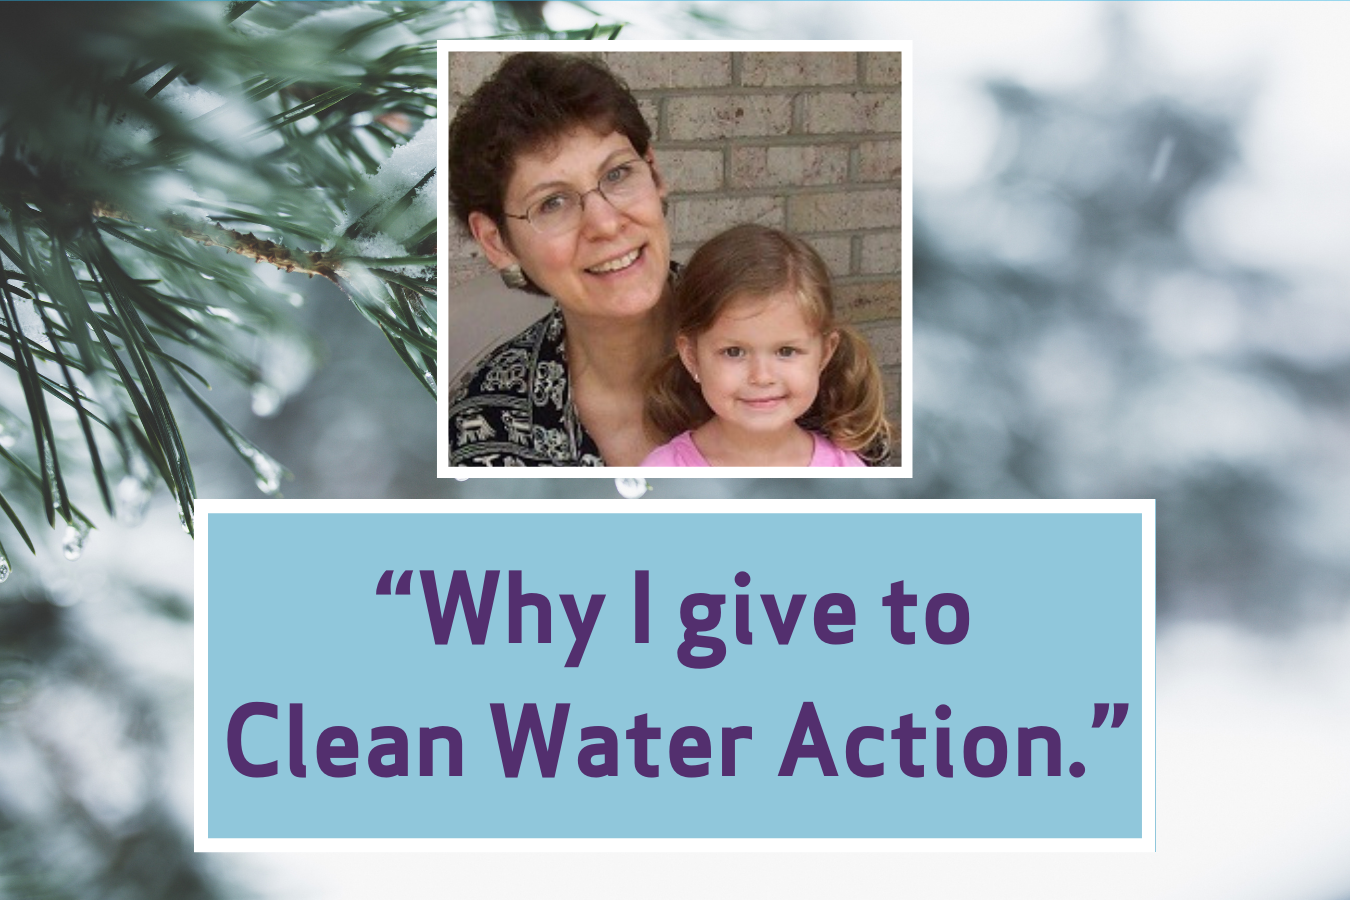 Image of Ellie Goldberg and her daughter with text that says "Why I Give to Clean Water Action"